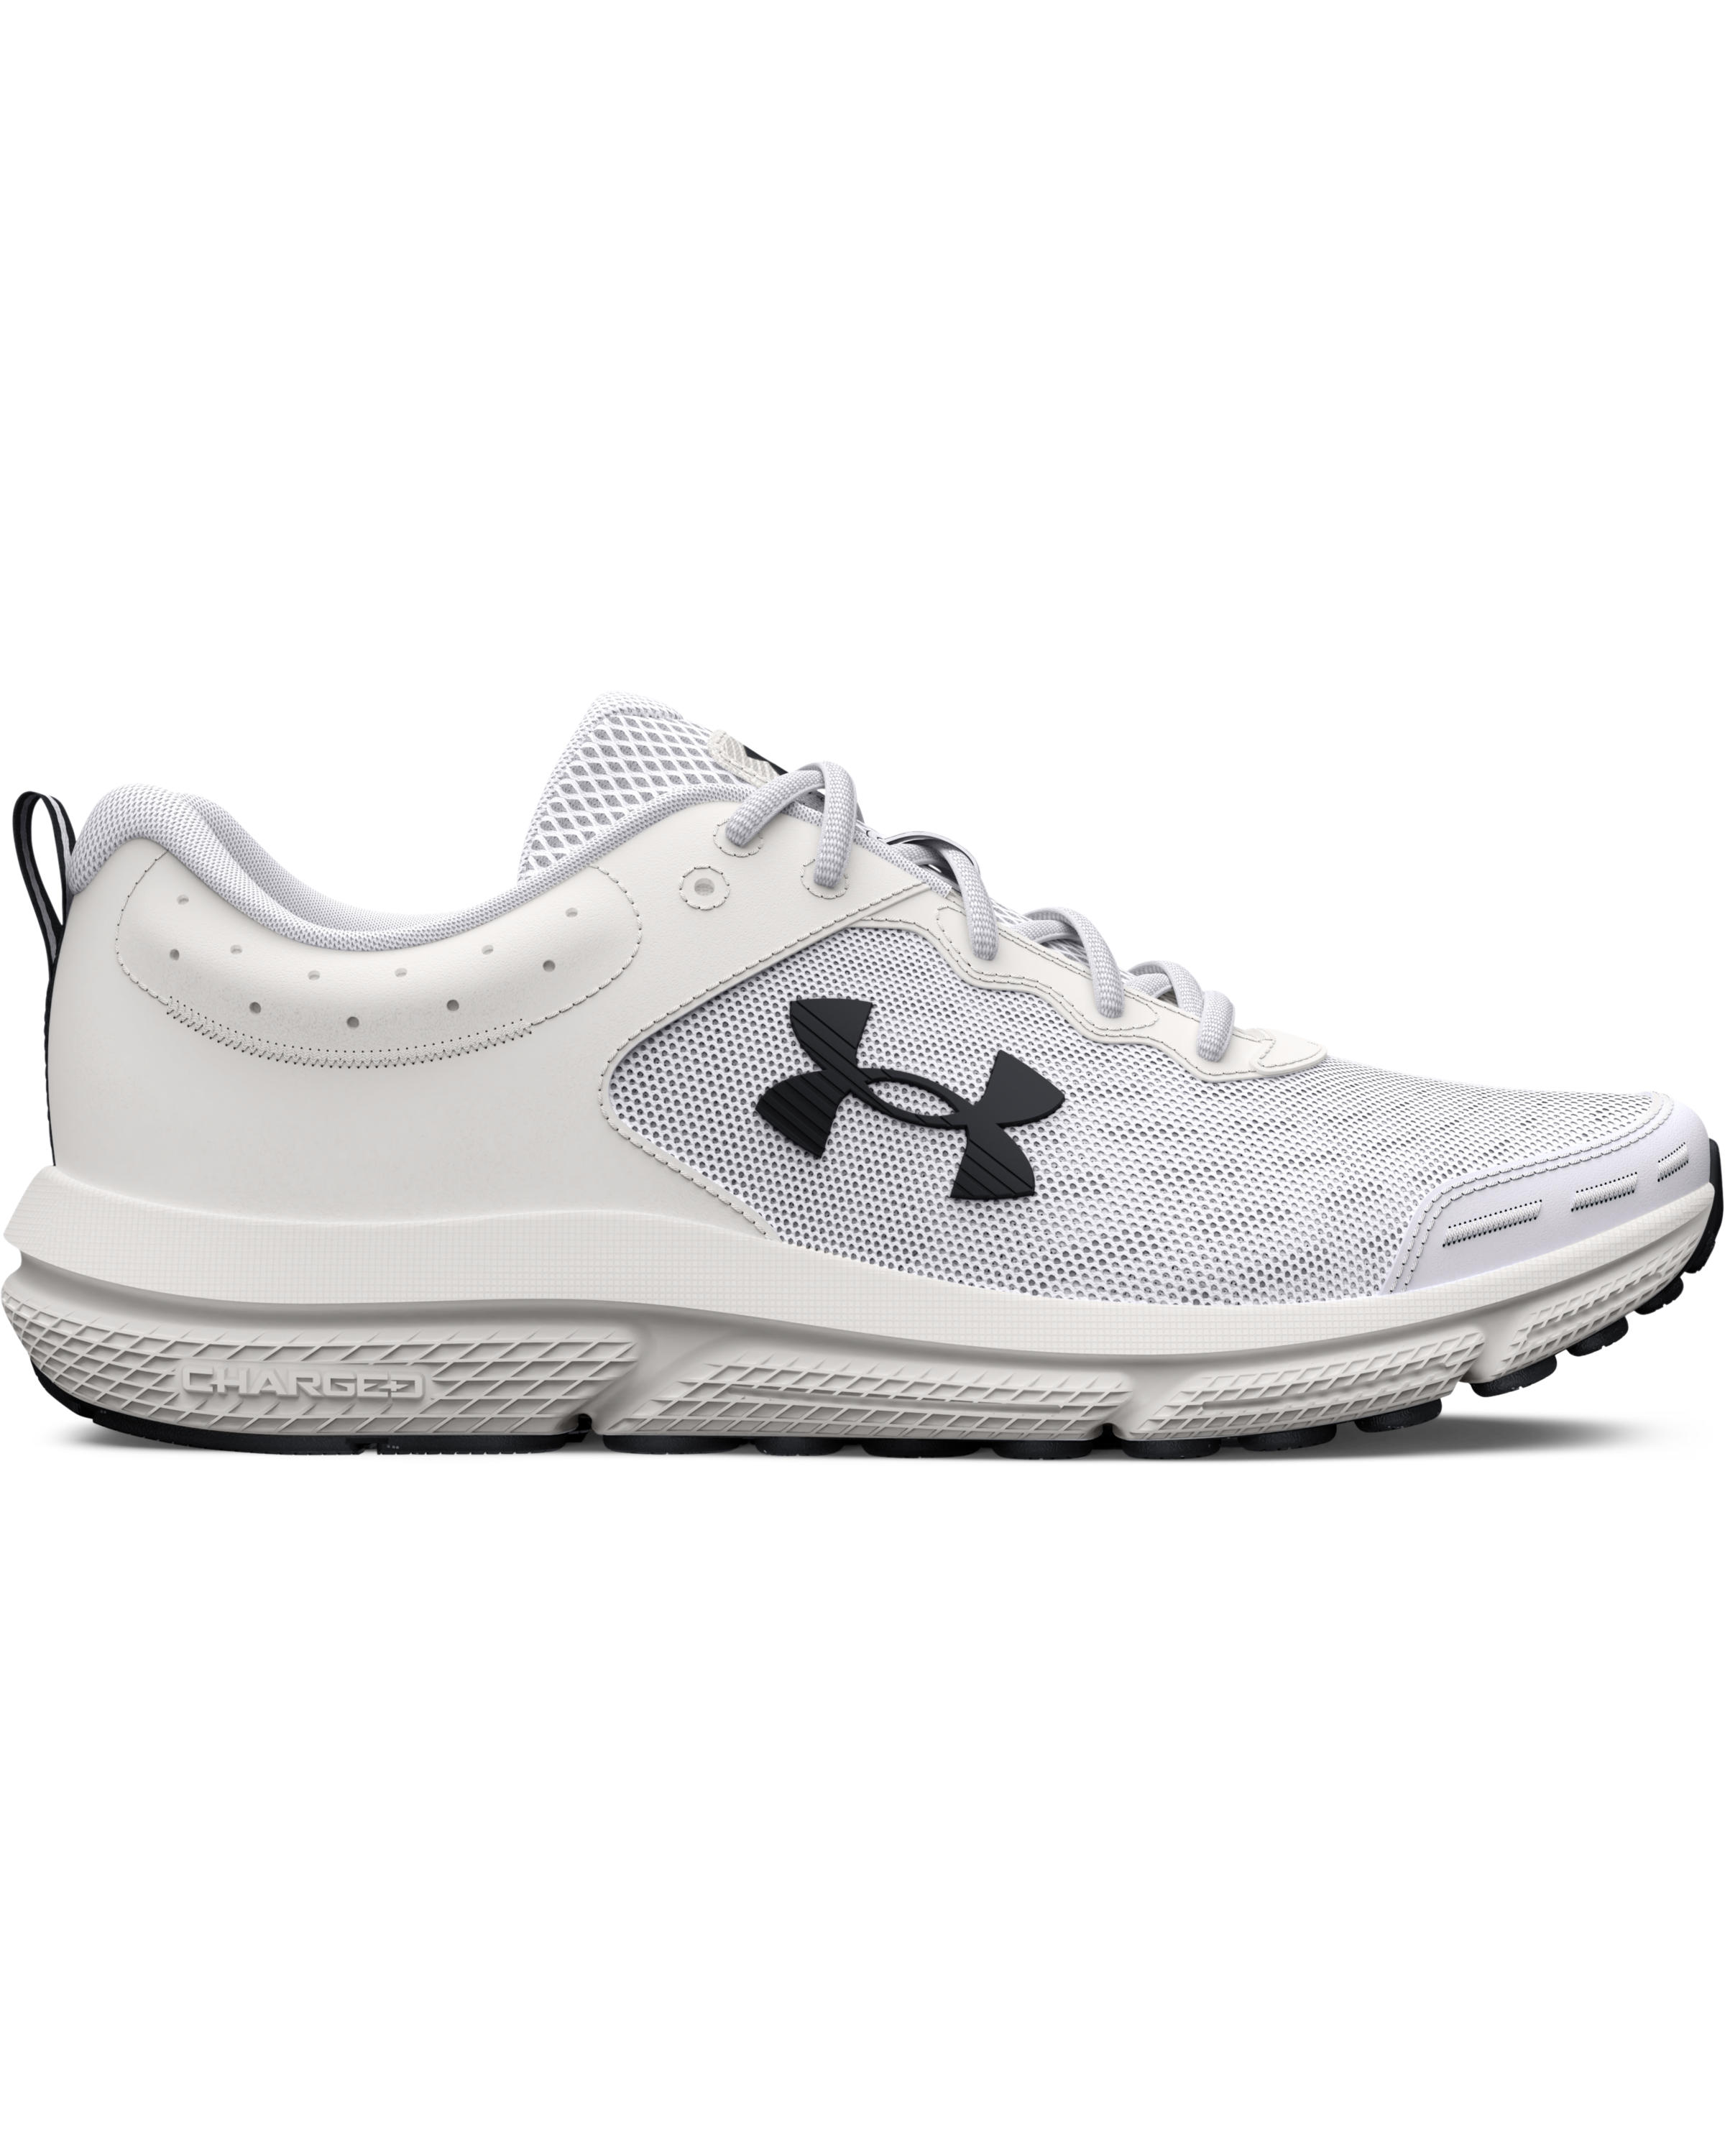 Men's Charged Assert 9 Running Shoe from Under Armour